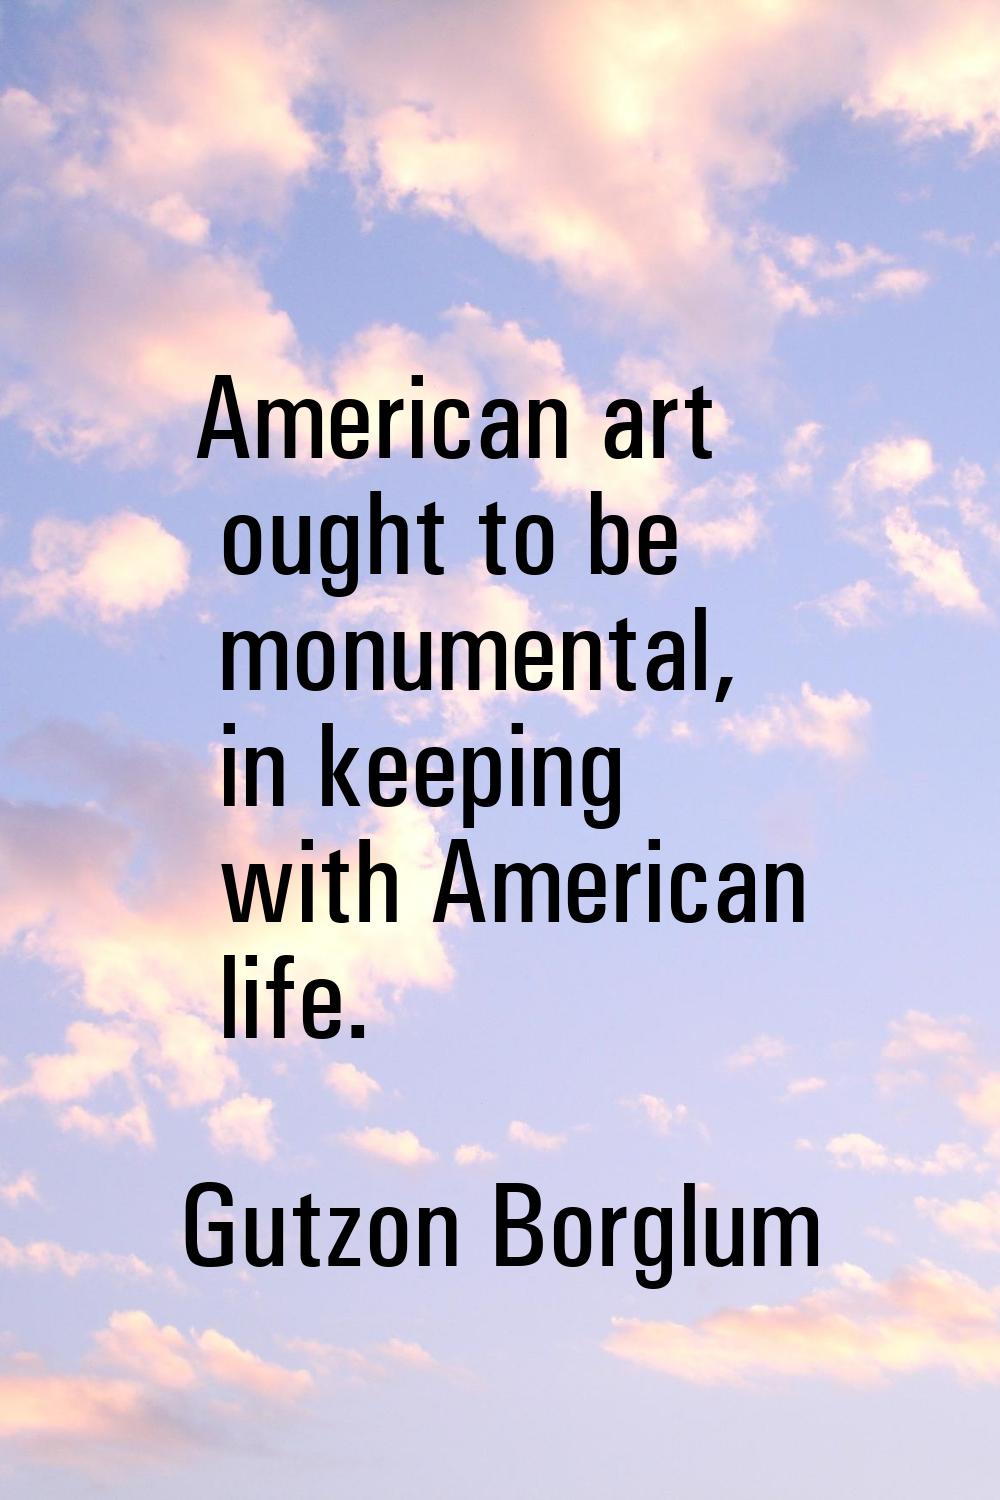 American art ought to be monumental, in keeping with American life.